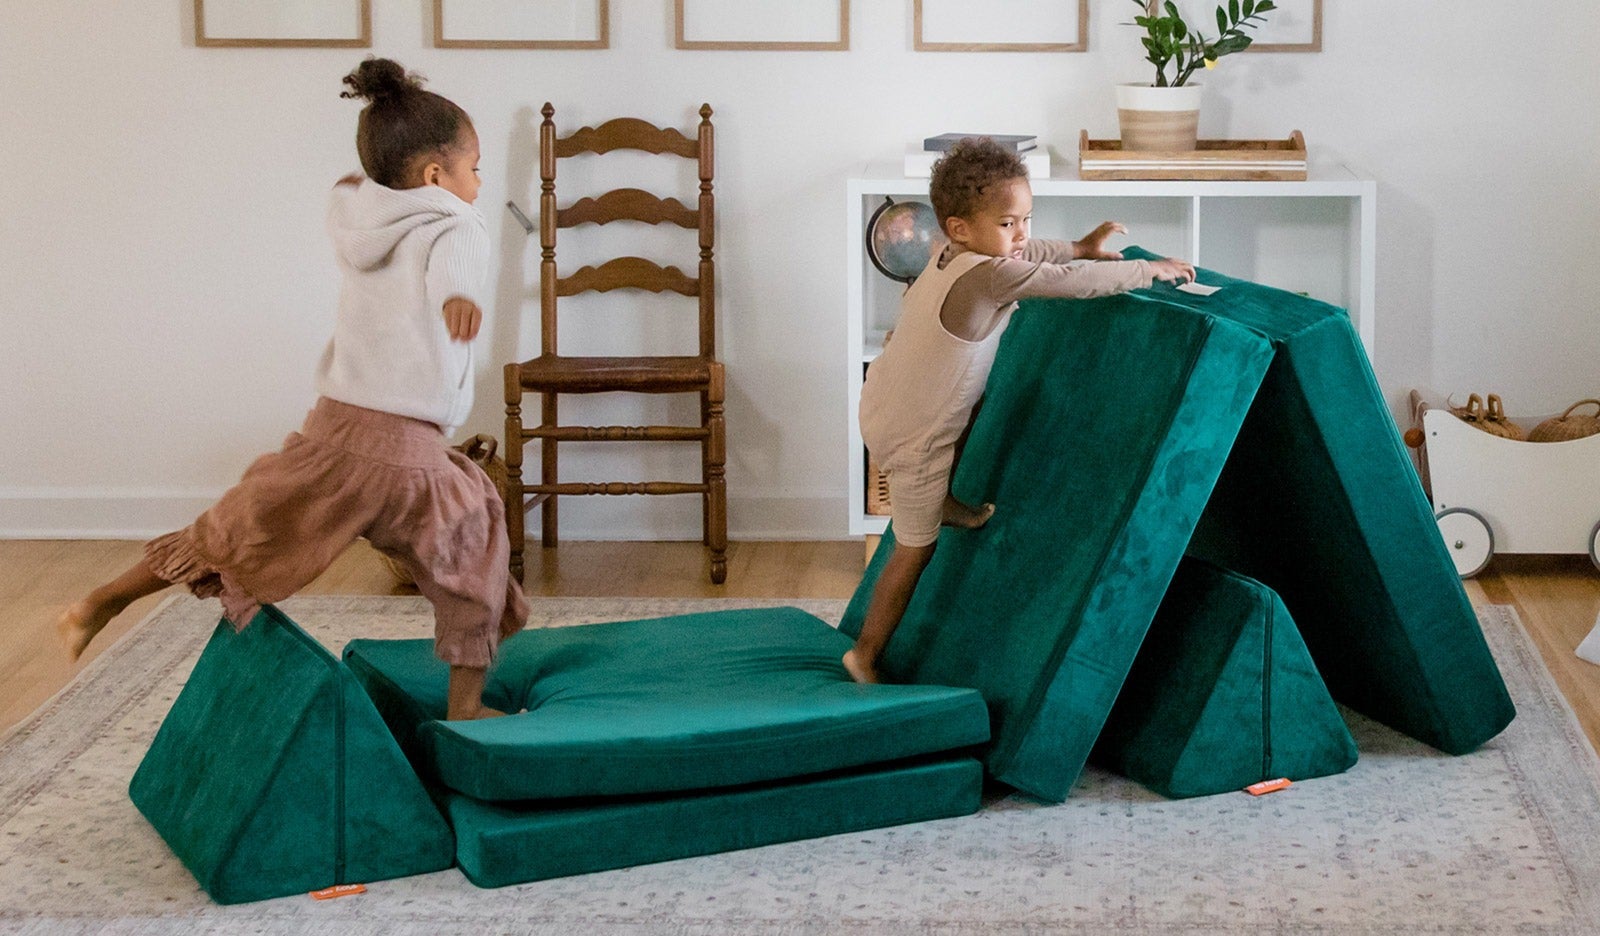 two kids playing on a emerald green nugget couch